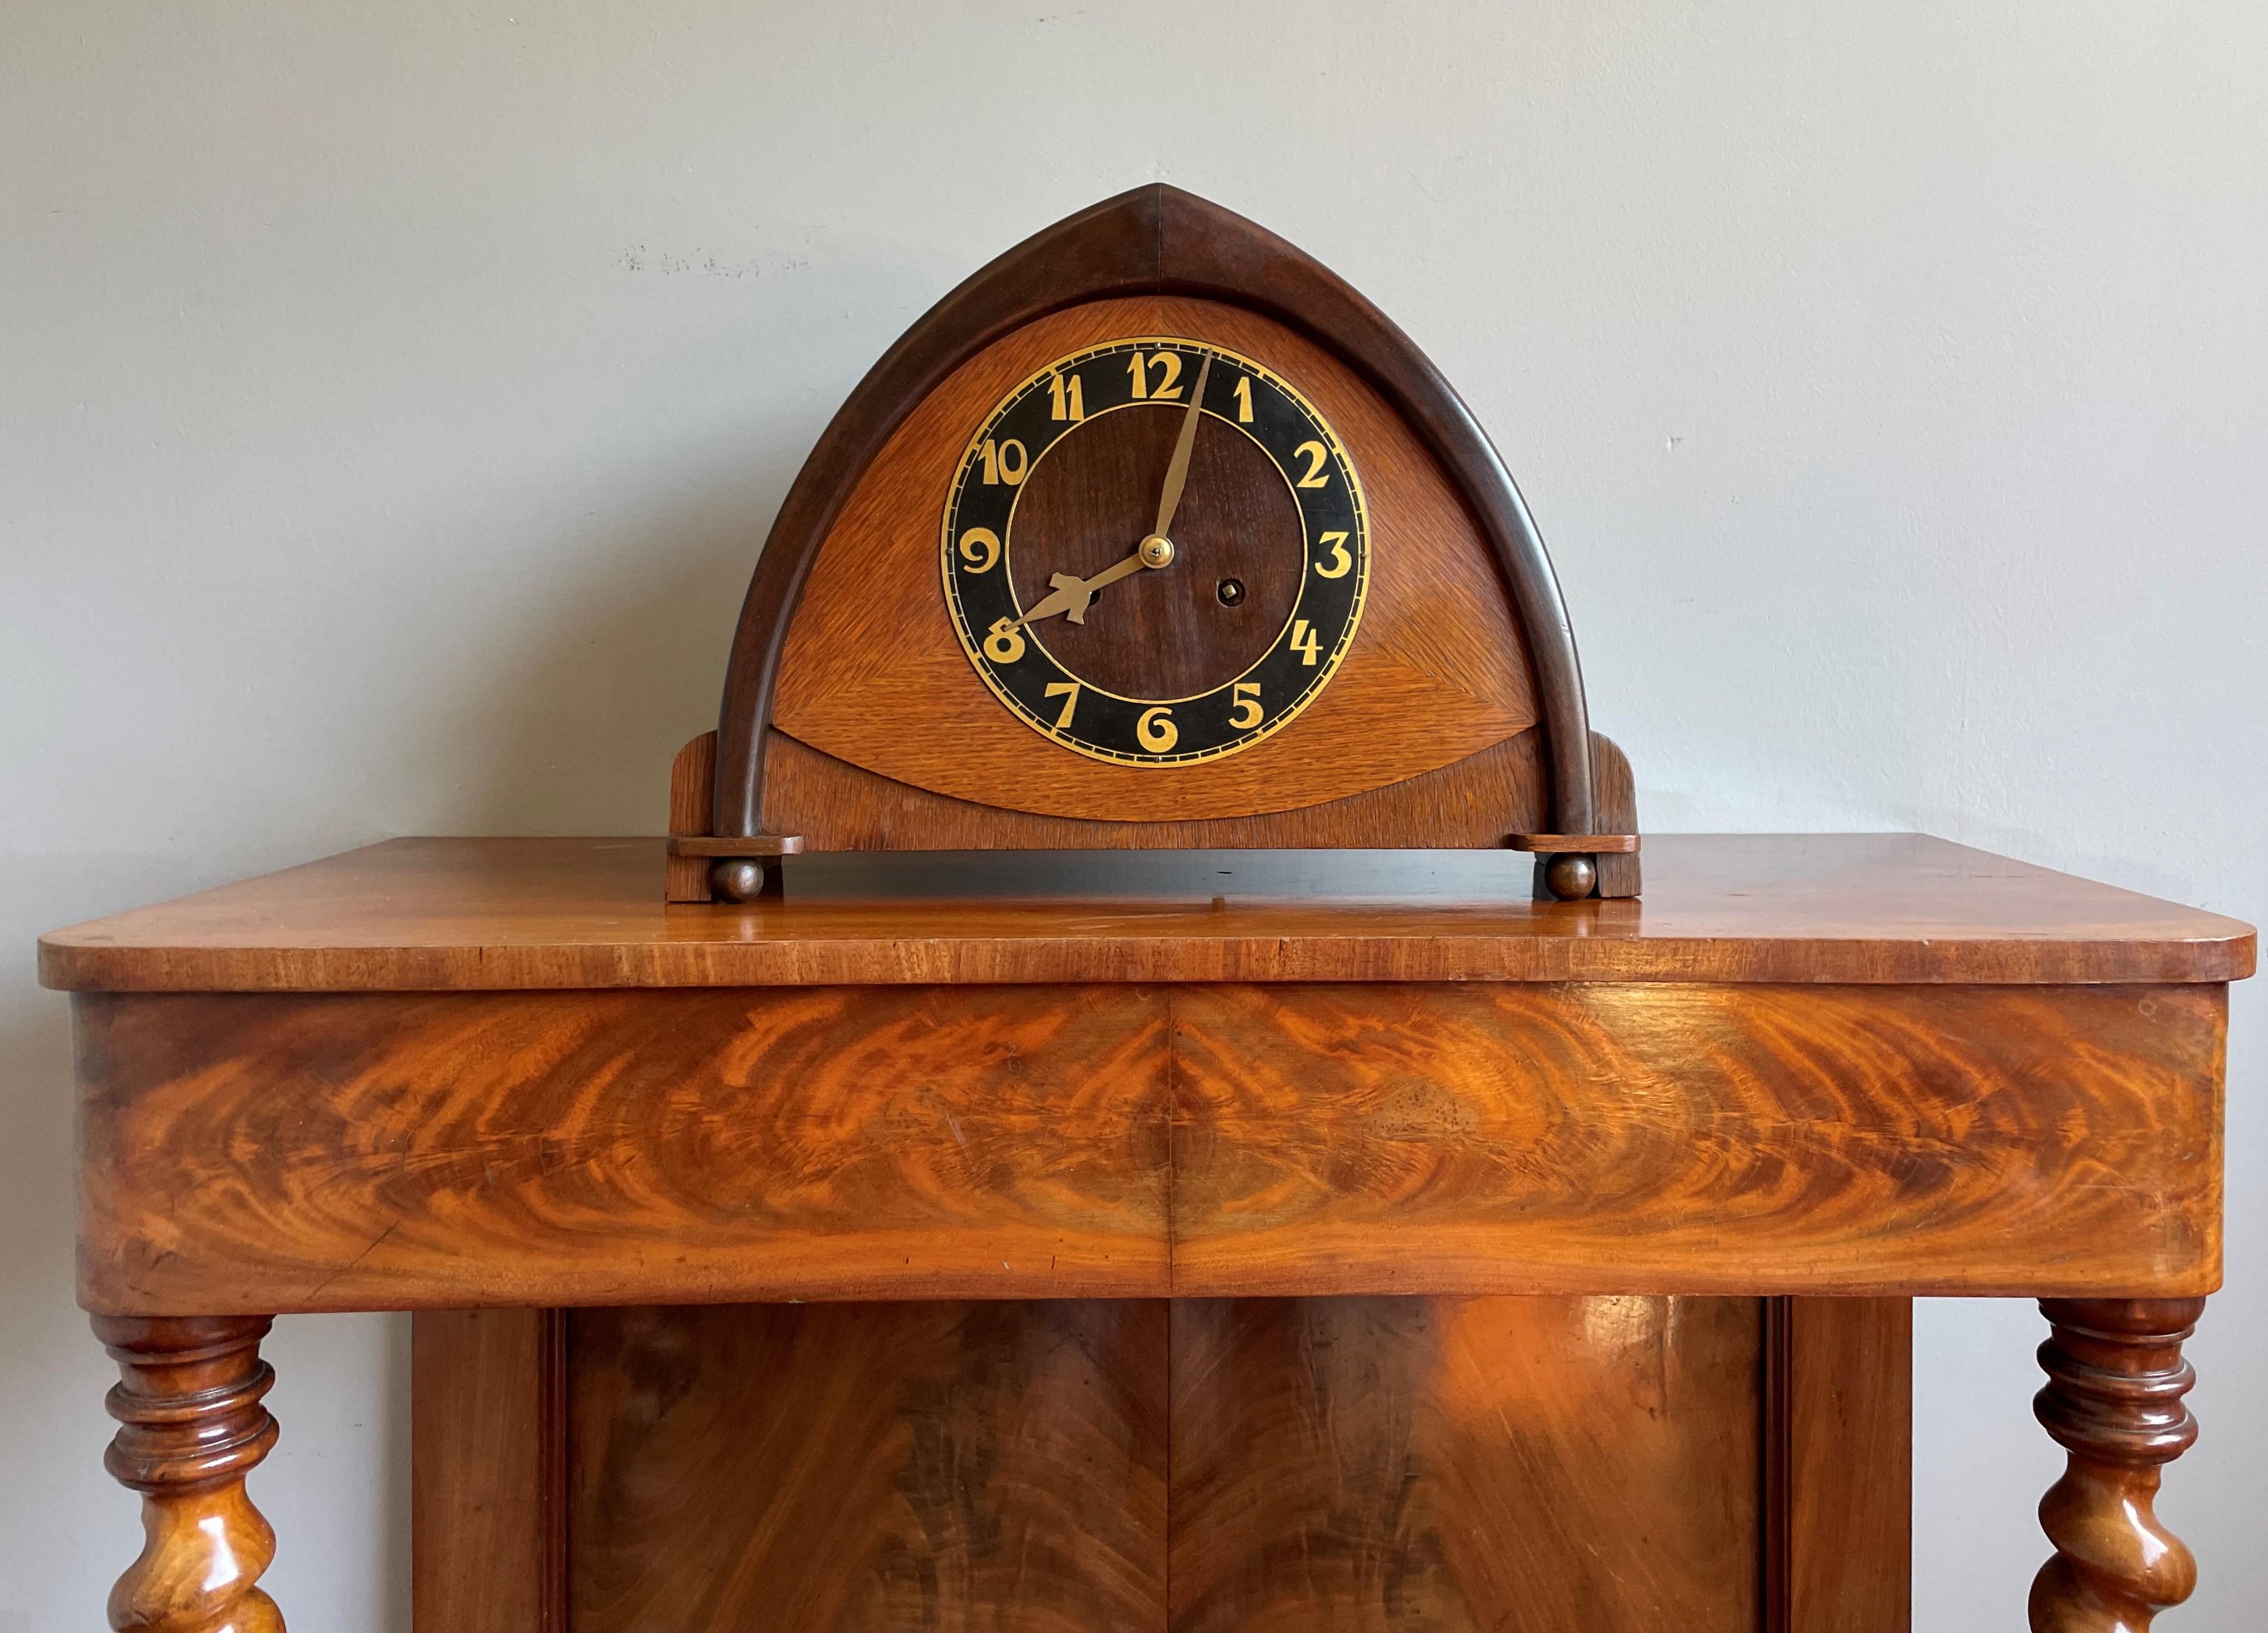 20th Century Dutch Arts & Crafts Wooden Mantle or Desk Clock w. Stunning Brass Dial Face 1915 For Sale